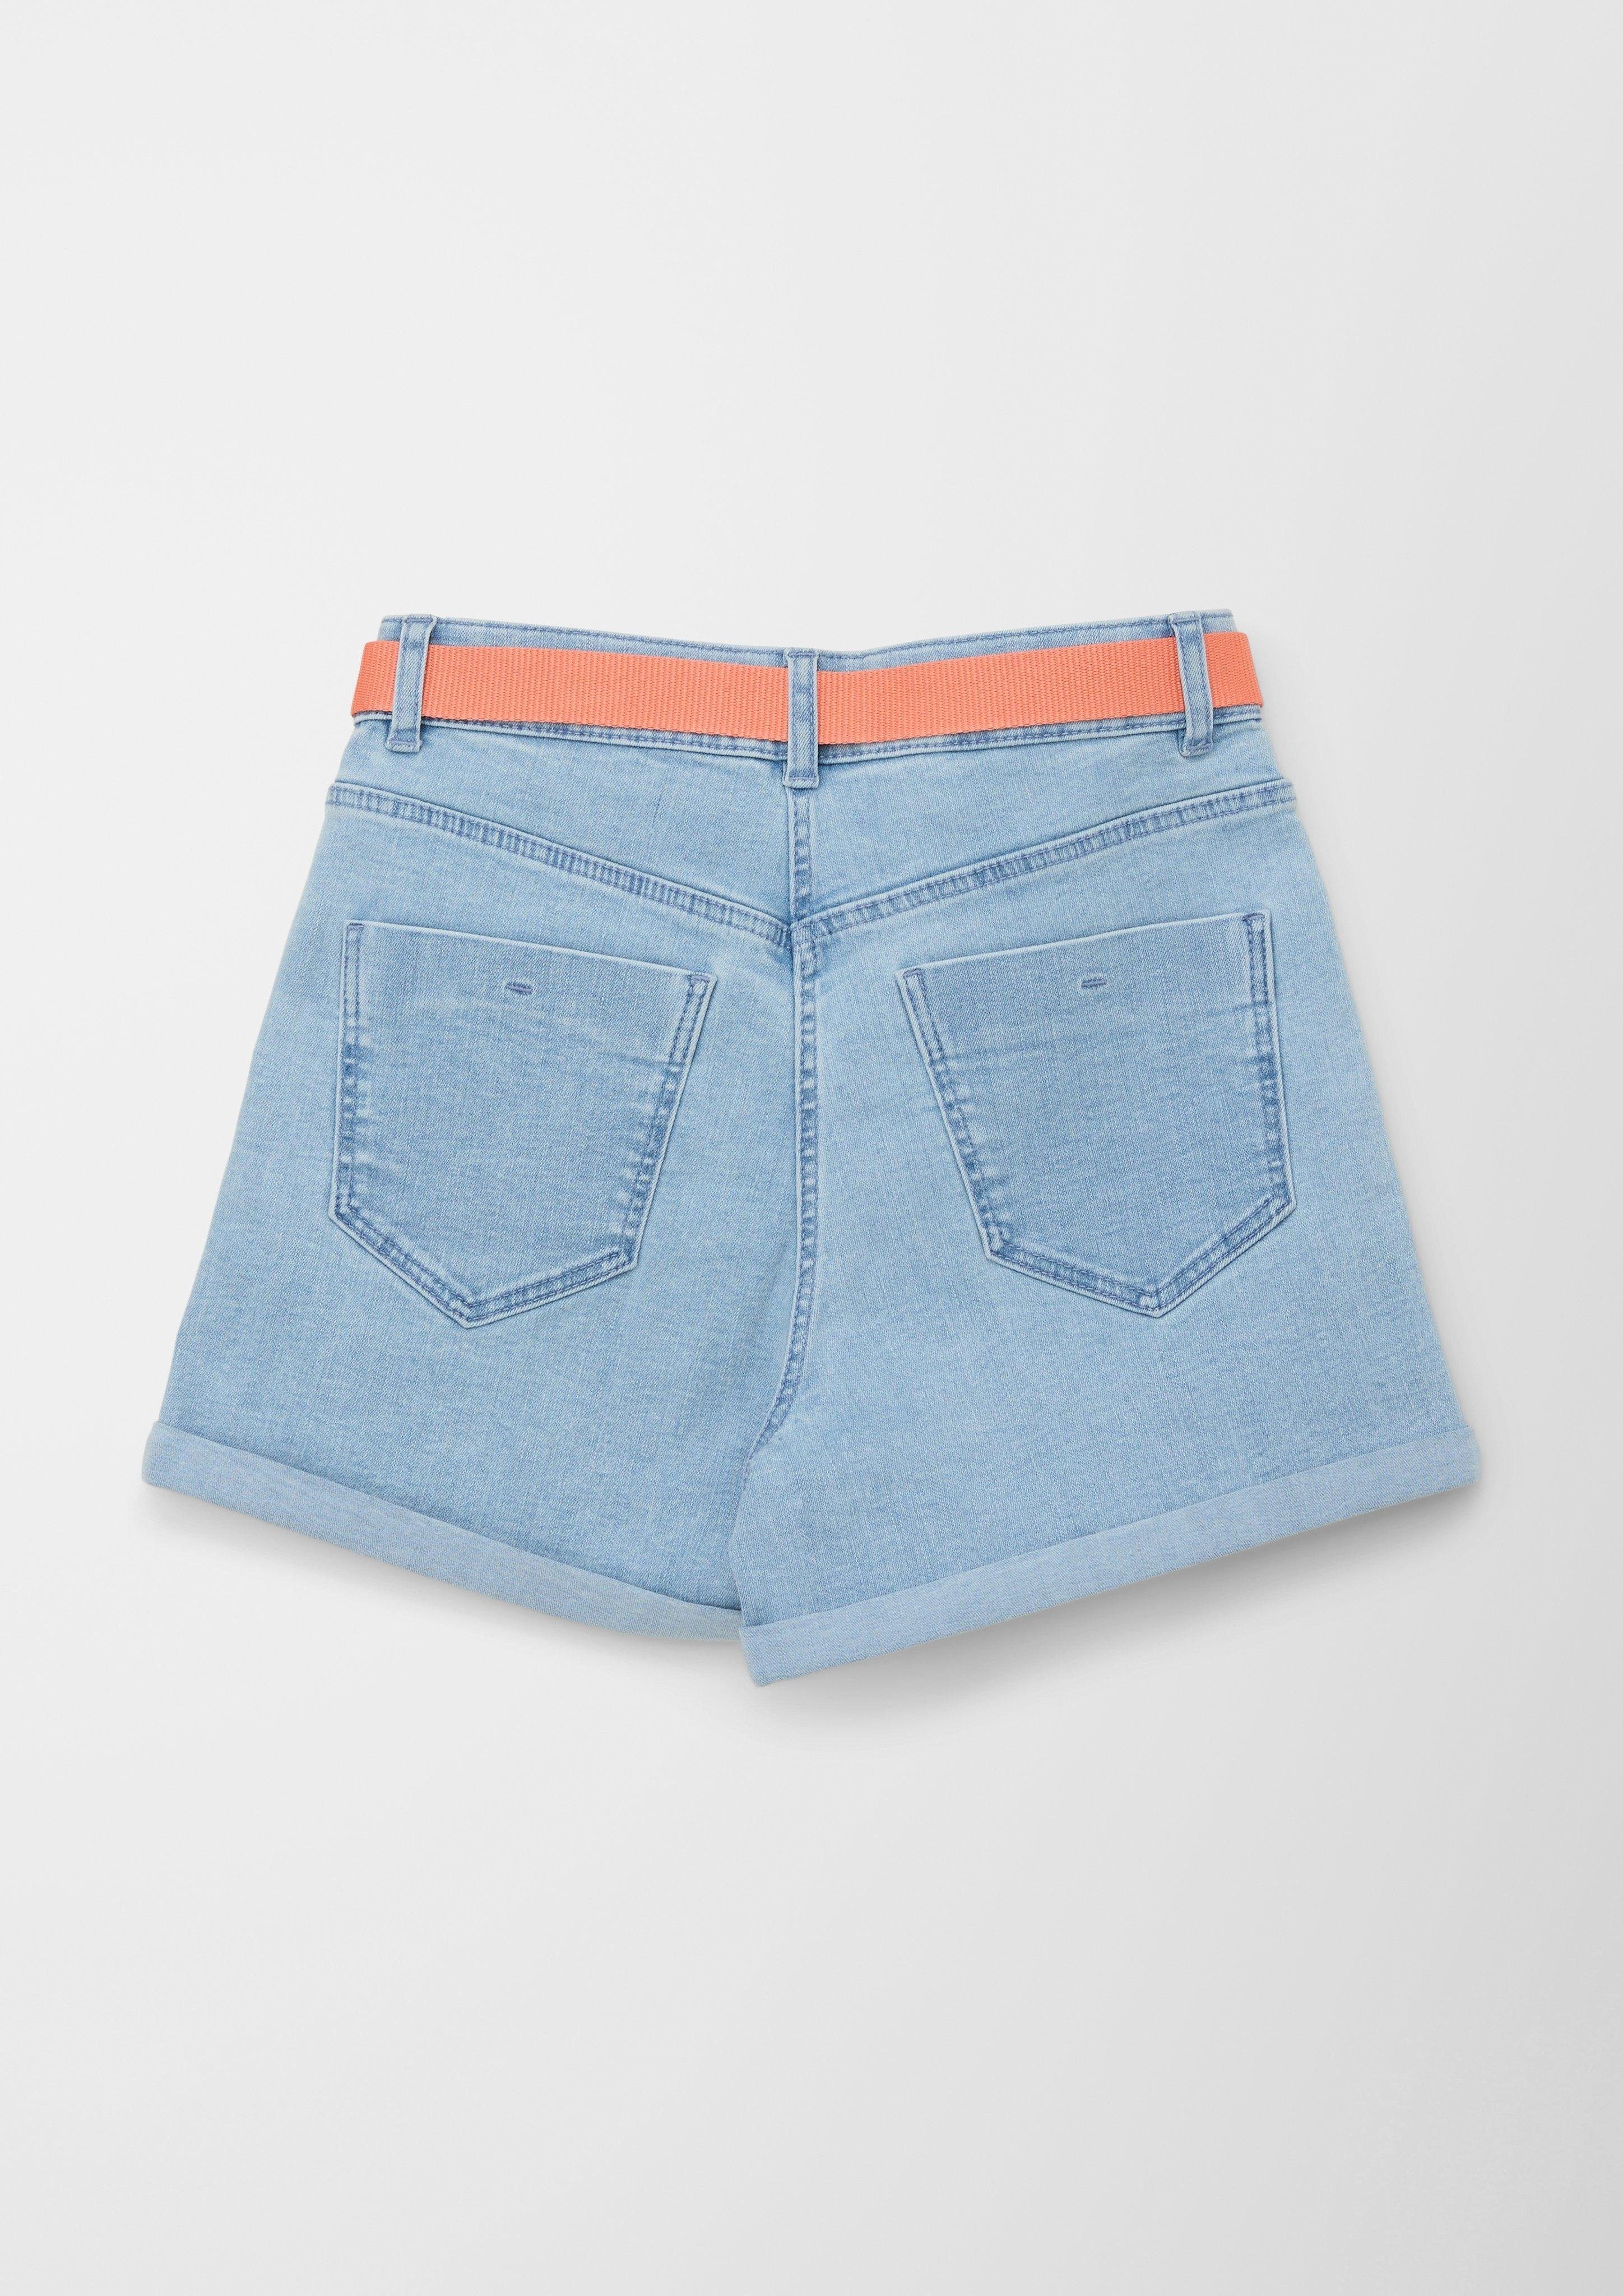 Leg / Fit Loose / Rise Waschung Jeansshorts / High Jeans-Shorts s.Oliver Wide